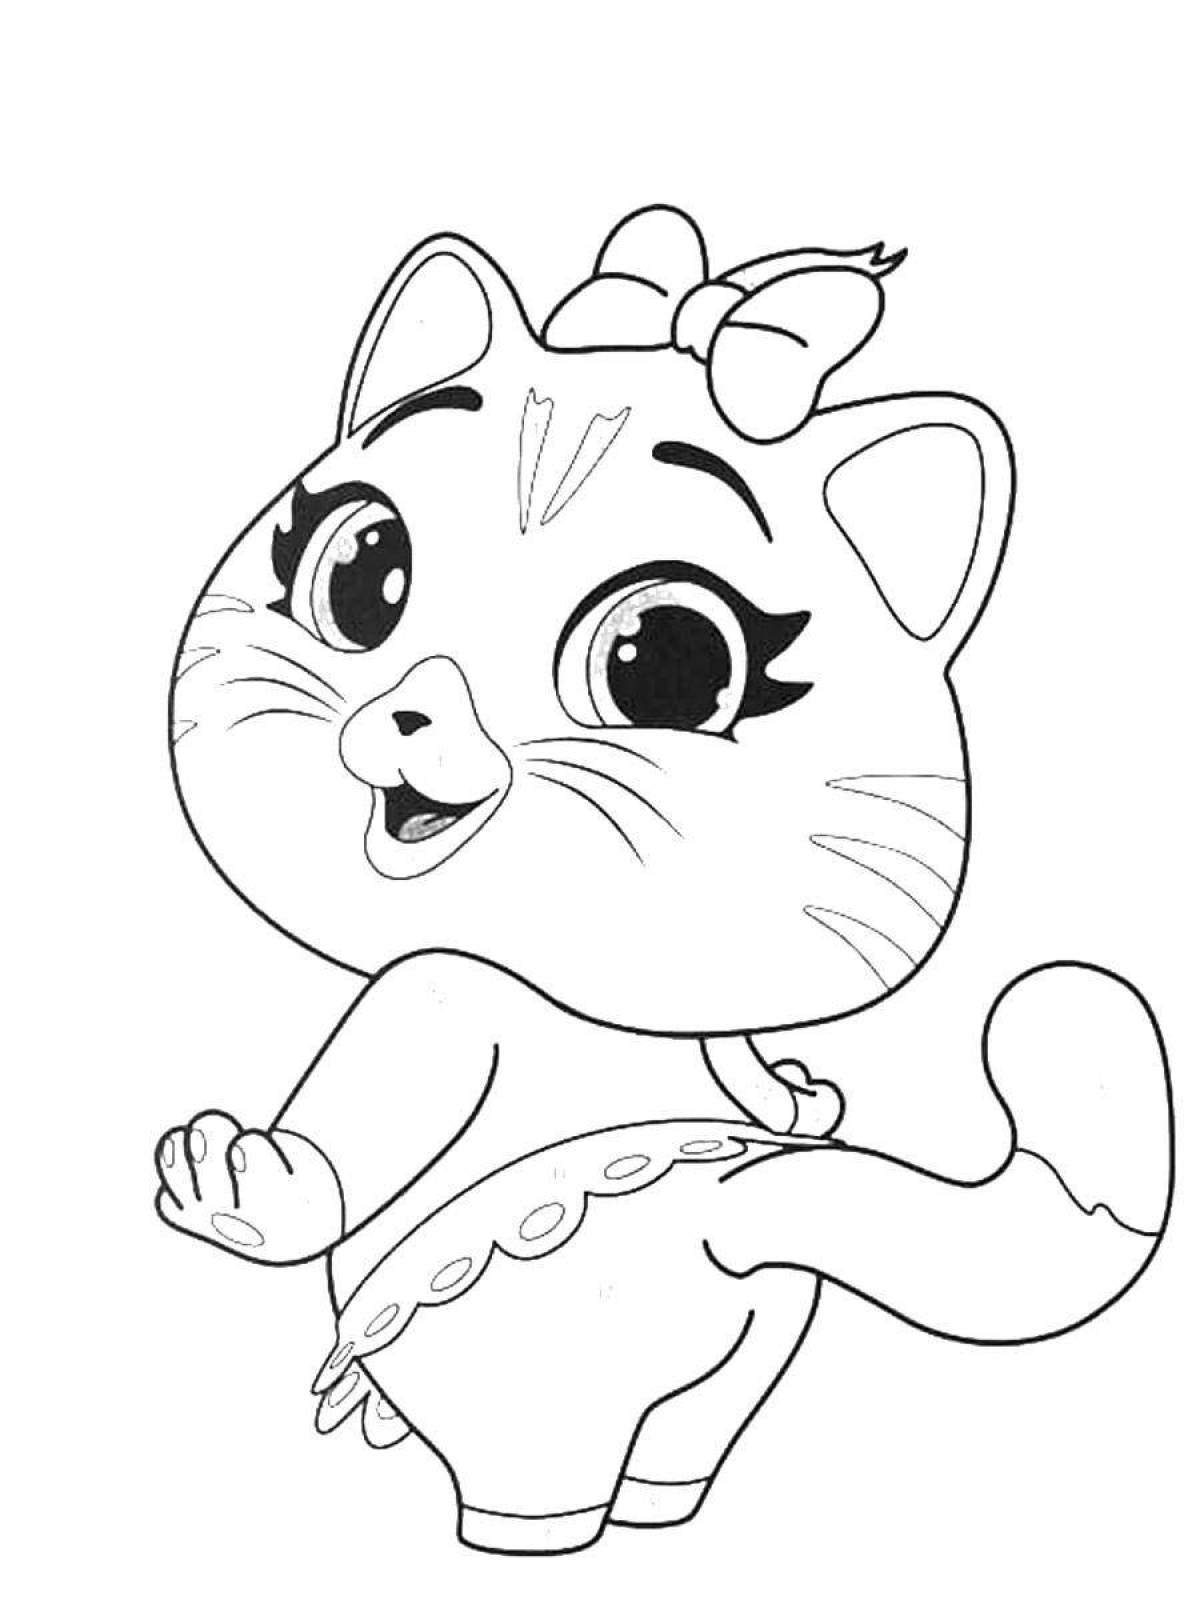 Sparkling kitty coloring book for kids 4-5 years old